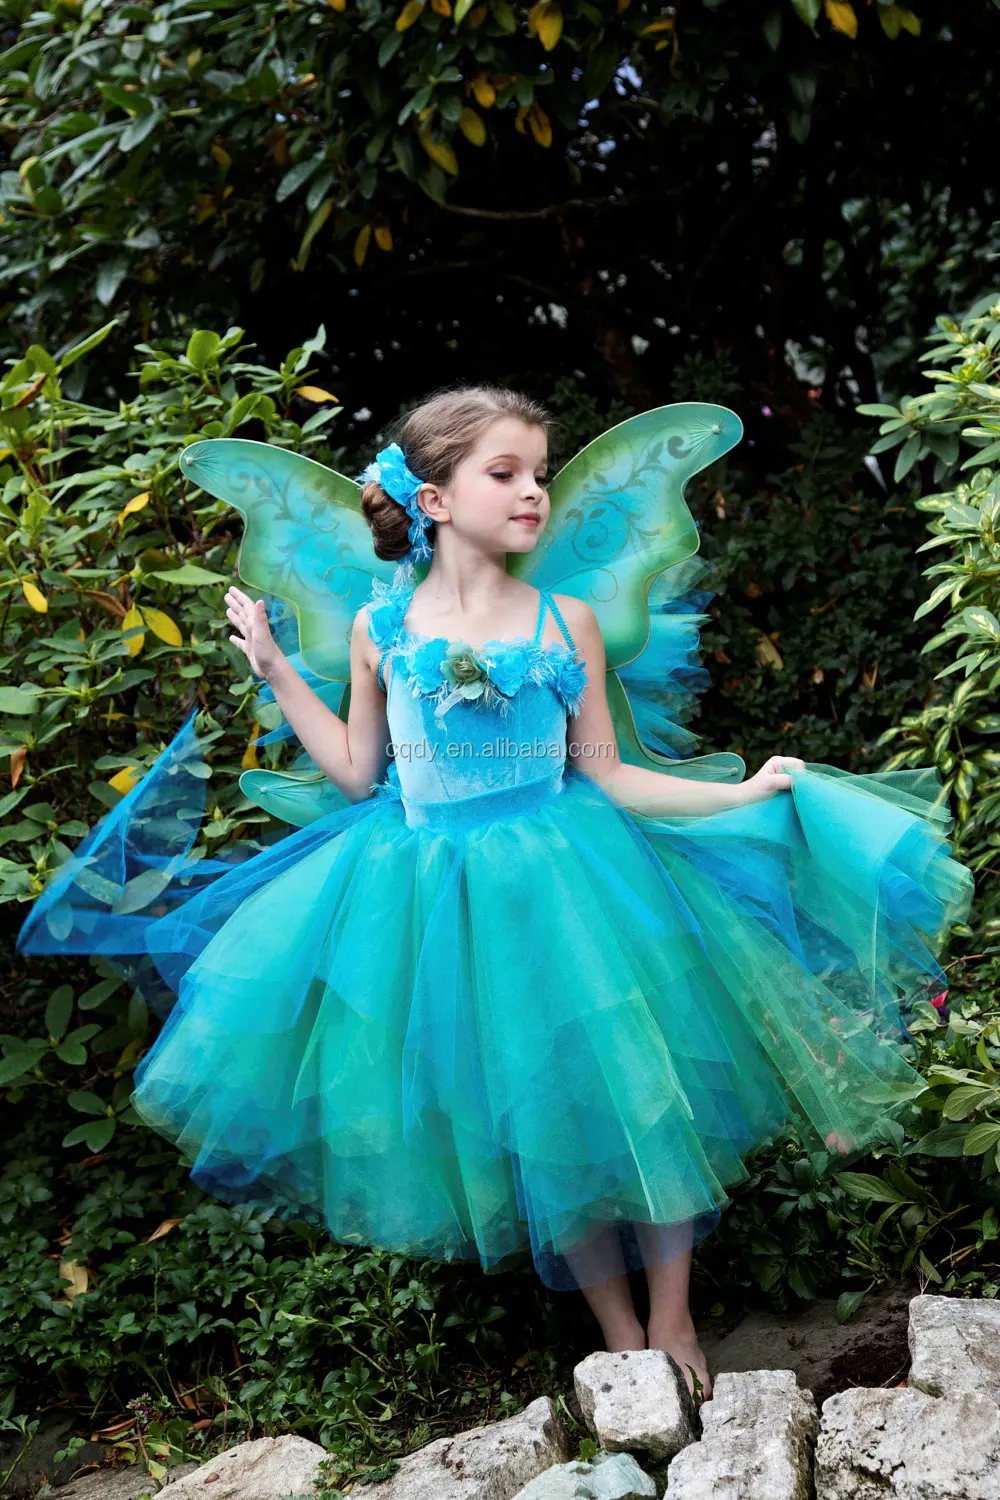 Baby Girls Fairy Dress Costume Butterfly Wing Glitter Colorful Girls